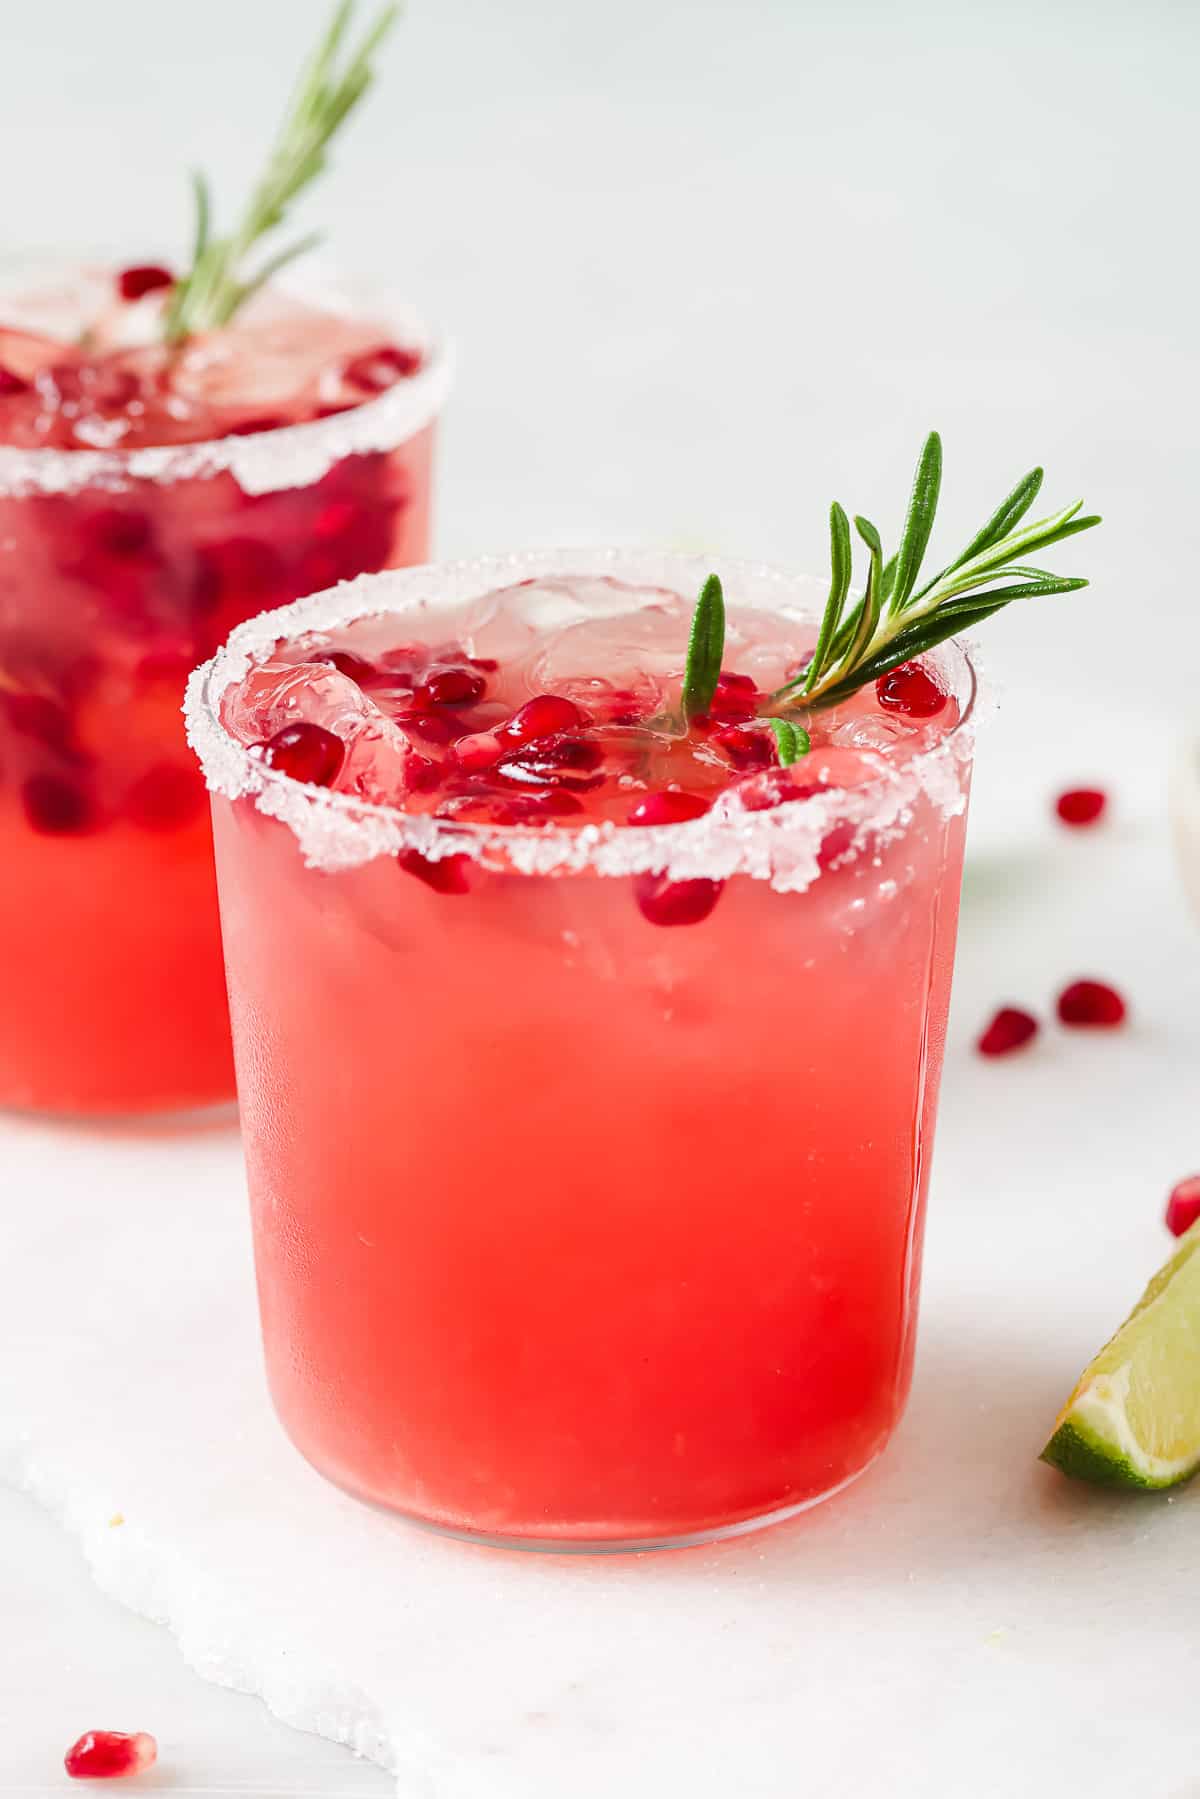 Pomegranate margarita with ice and pomegranate seeds.